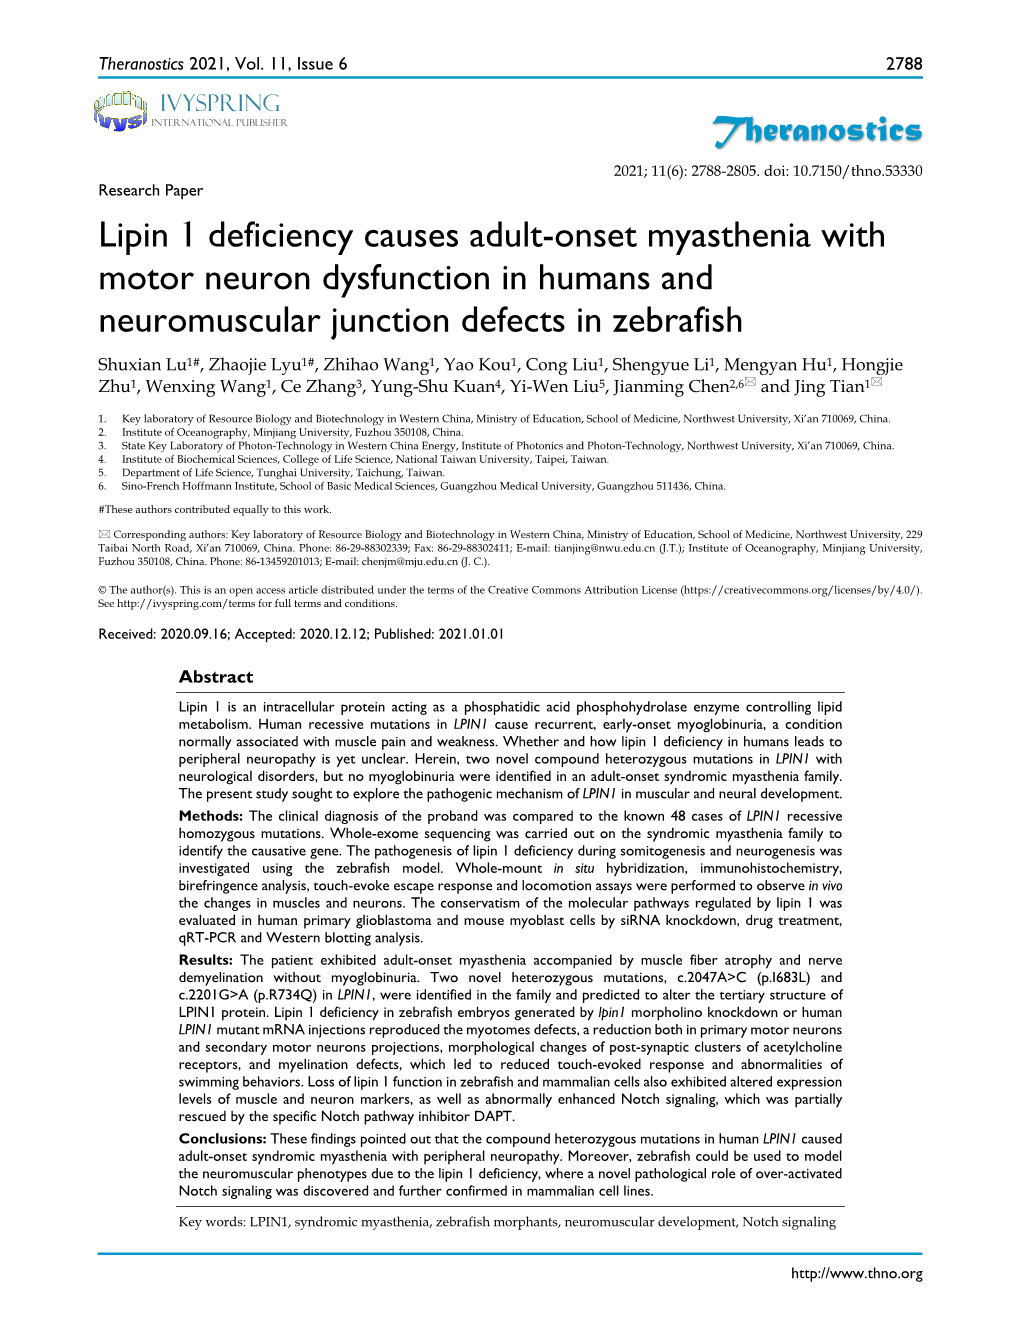 Theranostics Lipin 1 Deficiency Causes Adult-Onset Myasthenia With